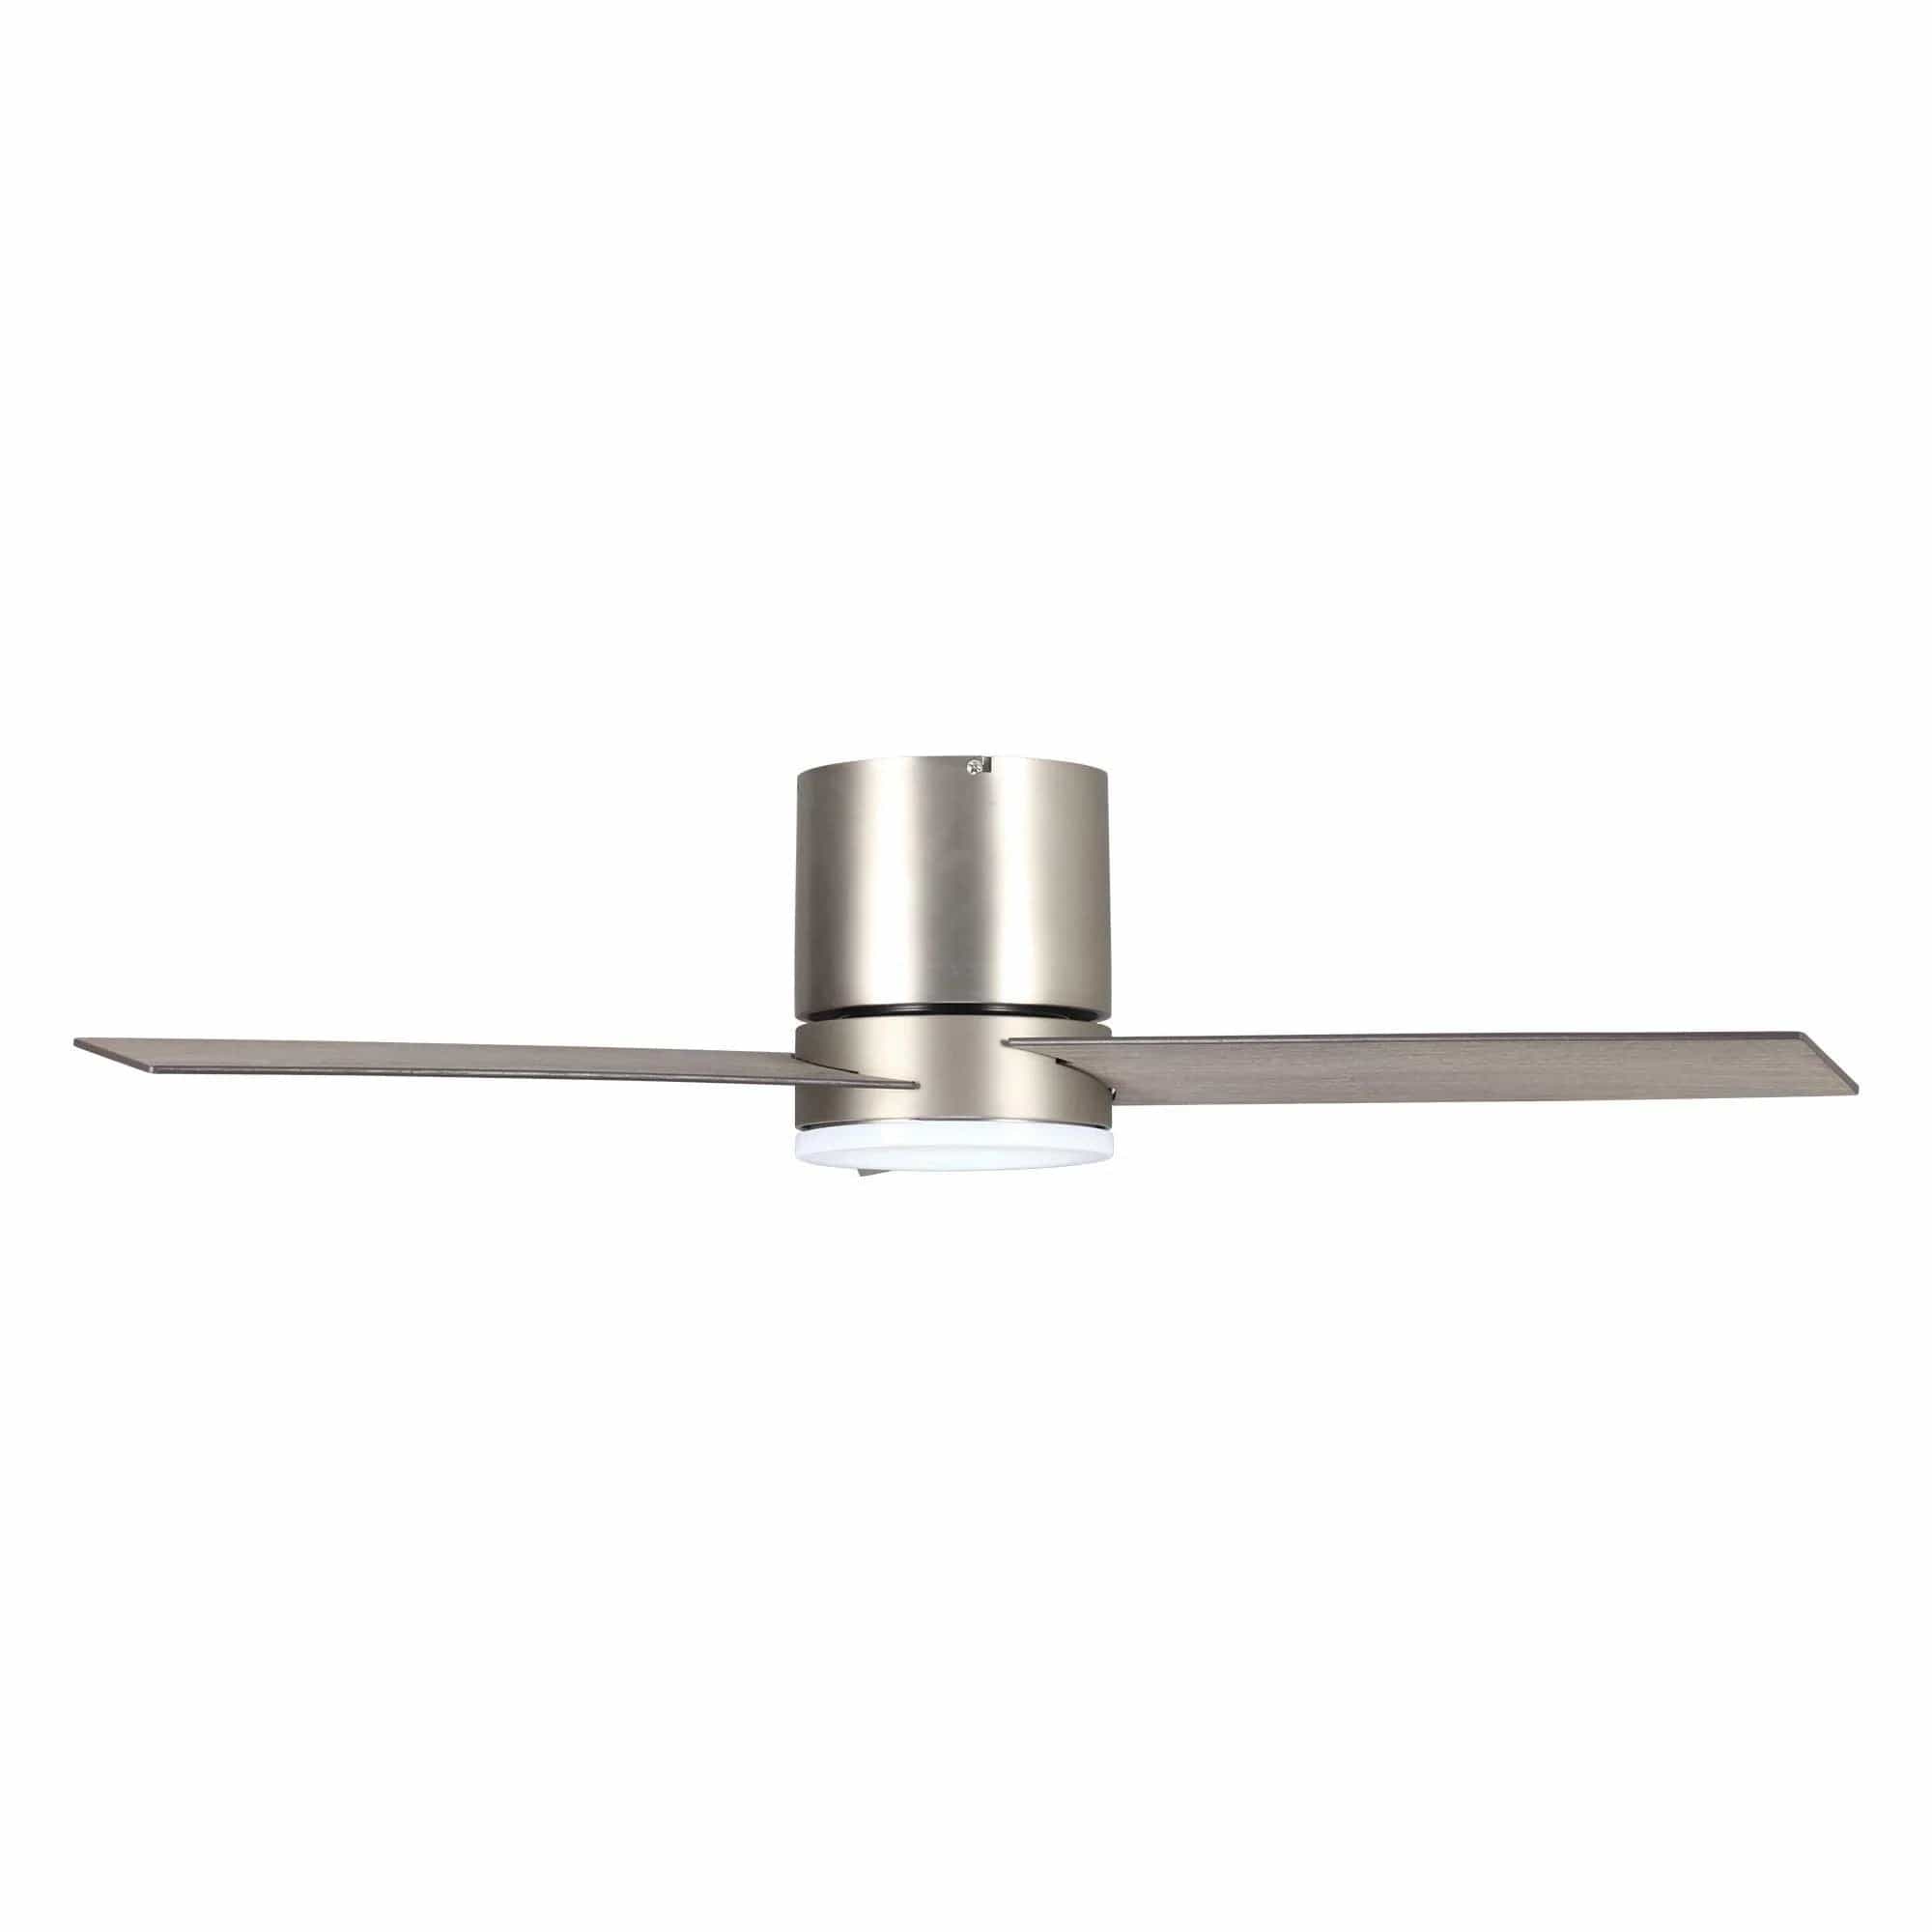 Parrot Uncle Parrot Uncle 48 In. Modern Ceiling Fan with Lighting and Remote Control Ceiling Fan F6298SN110V